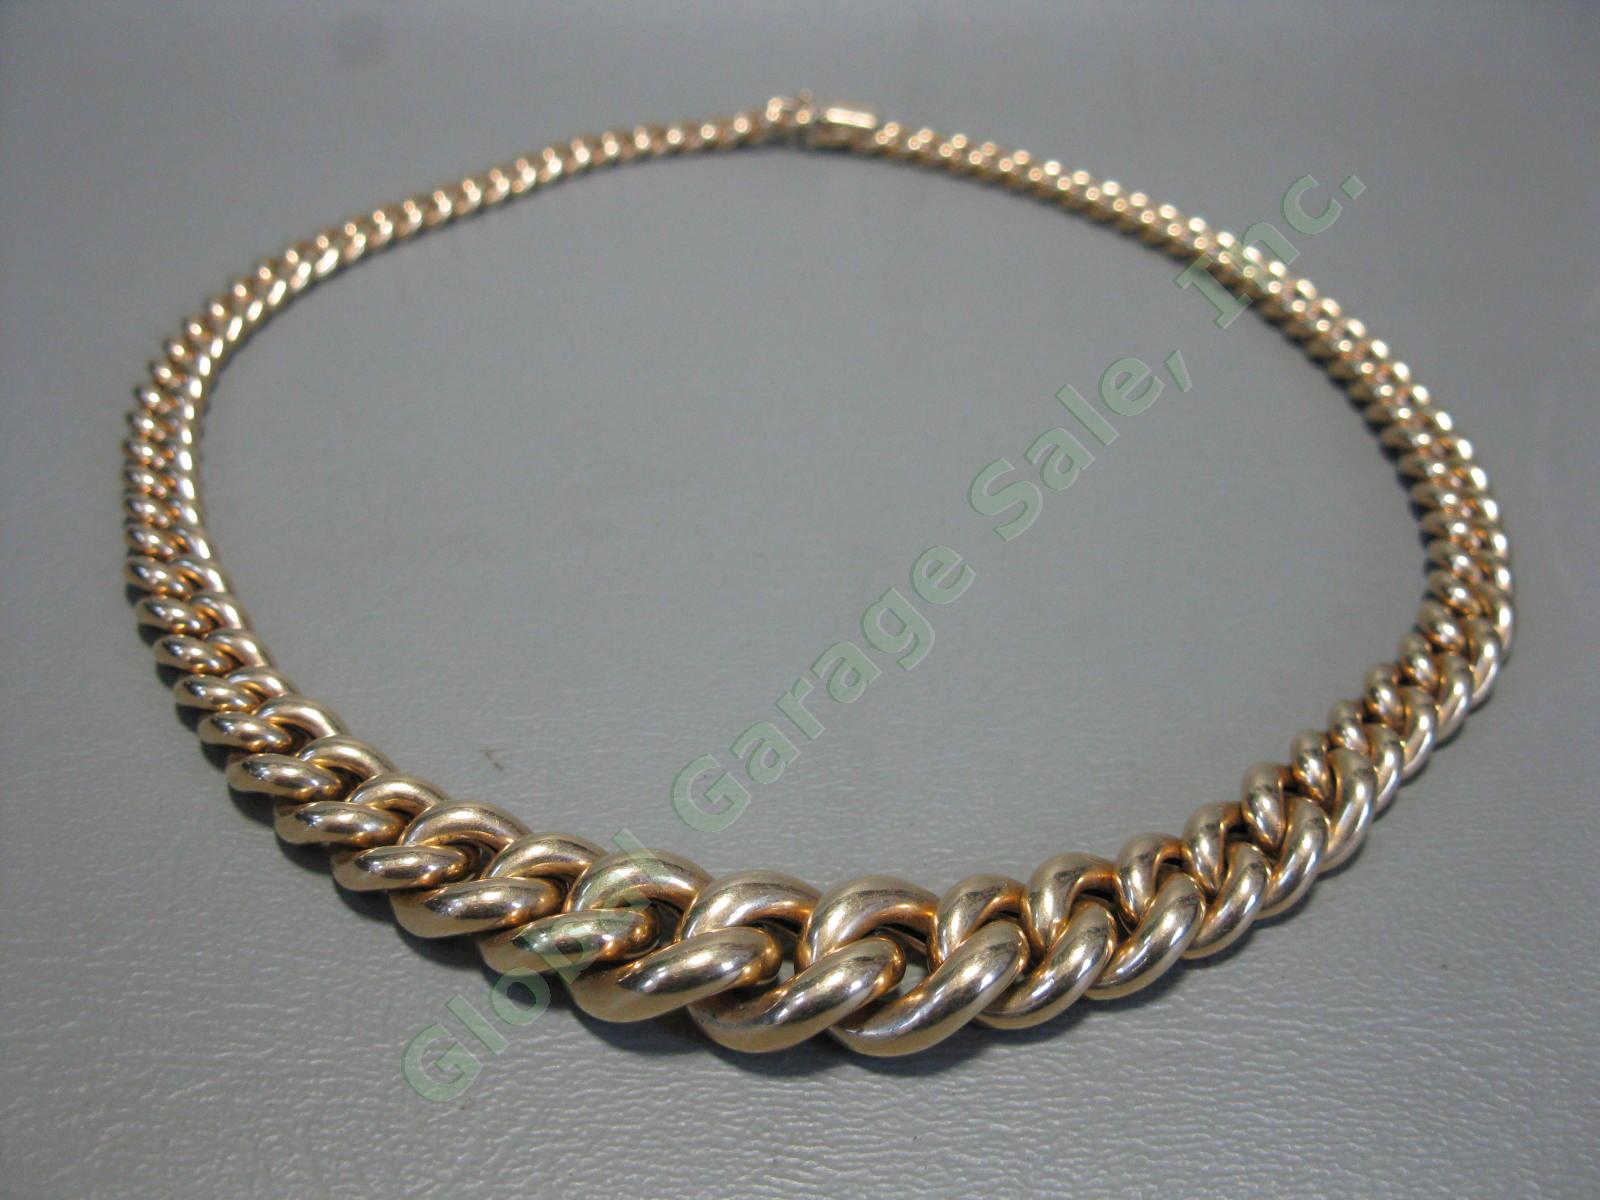 Heavy Vior 14k Solid Yellow Gold Link Chain 17" Necklace Choker 34 Grams Italy